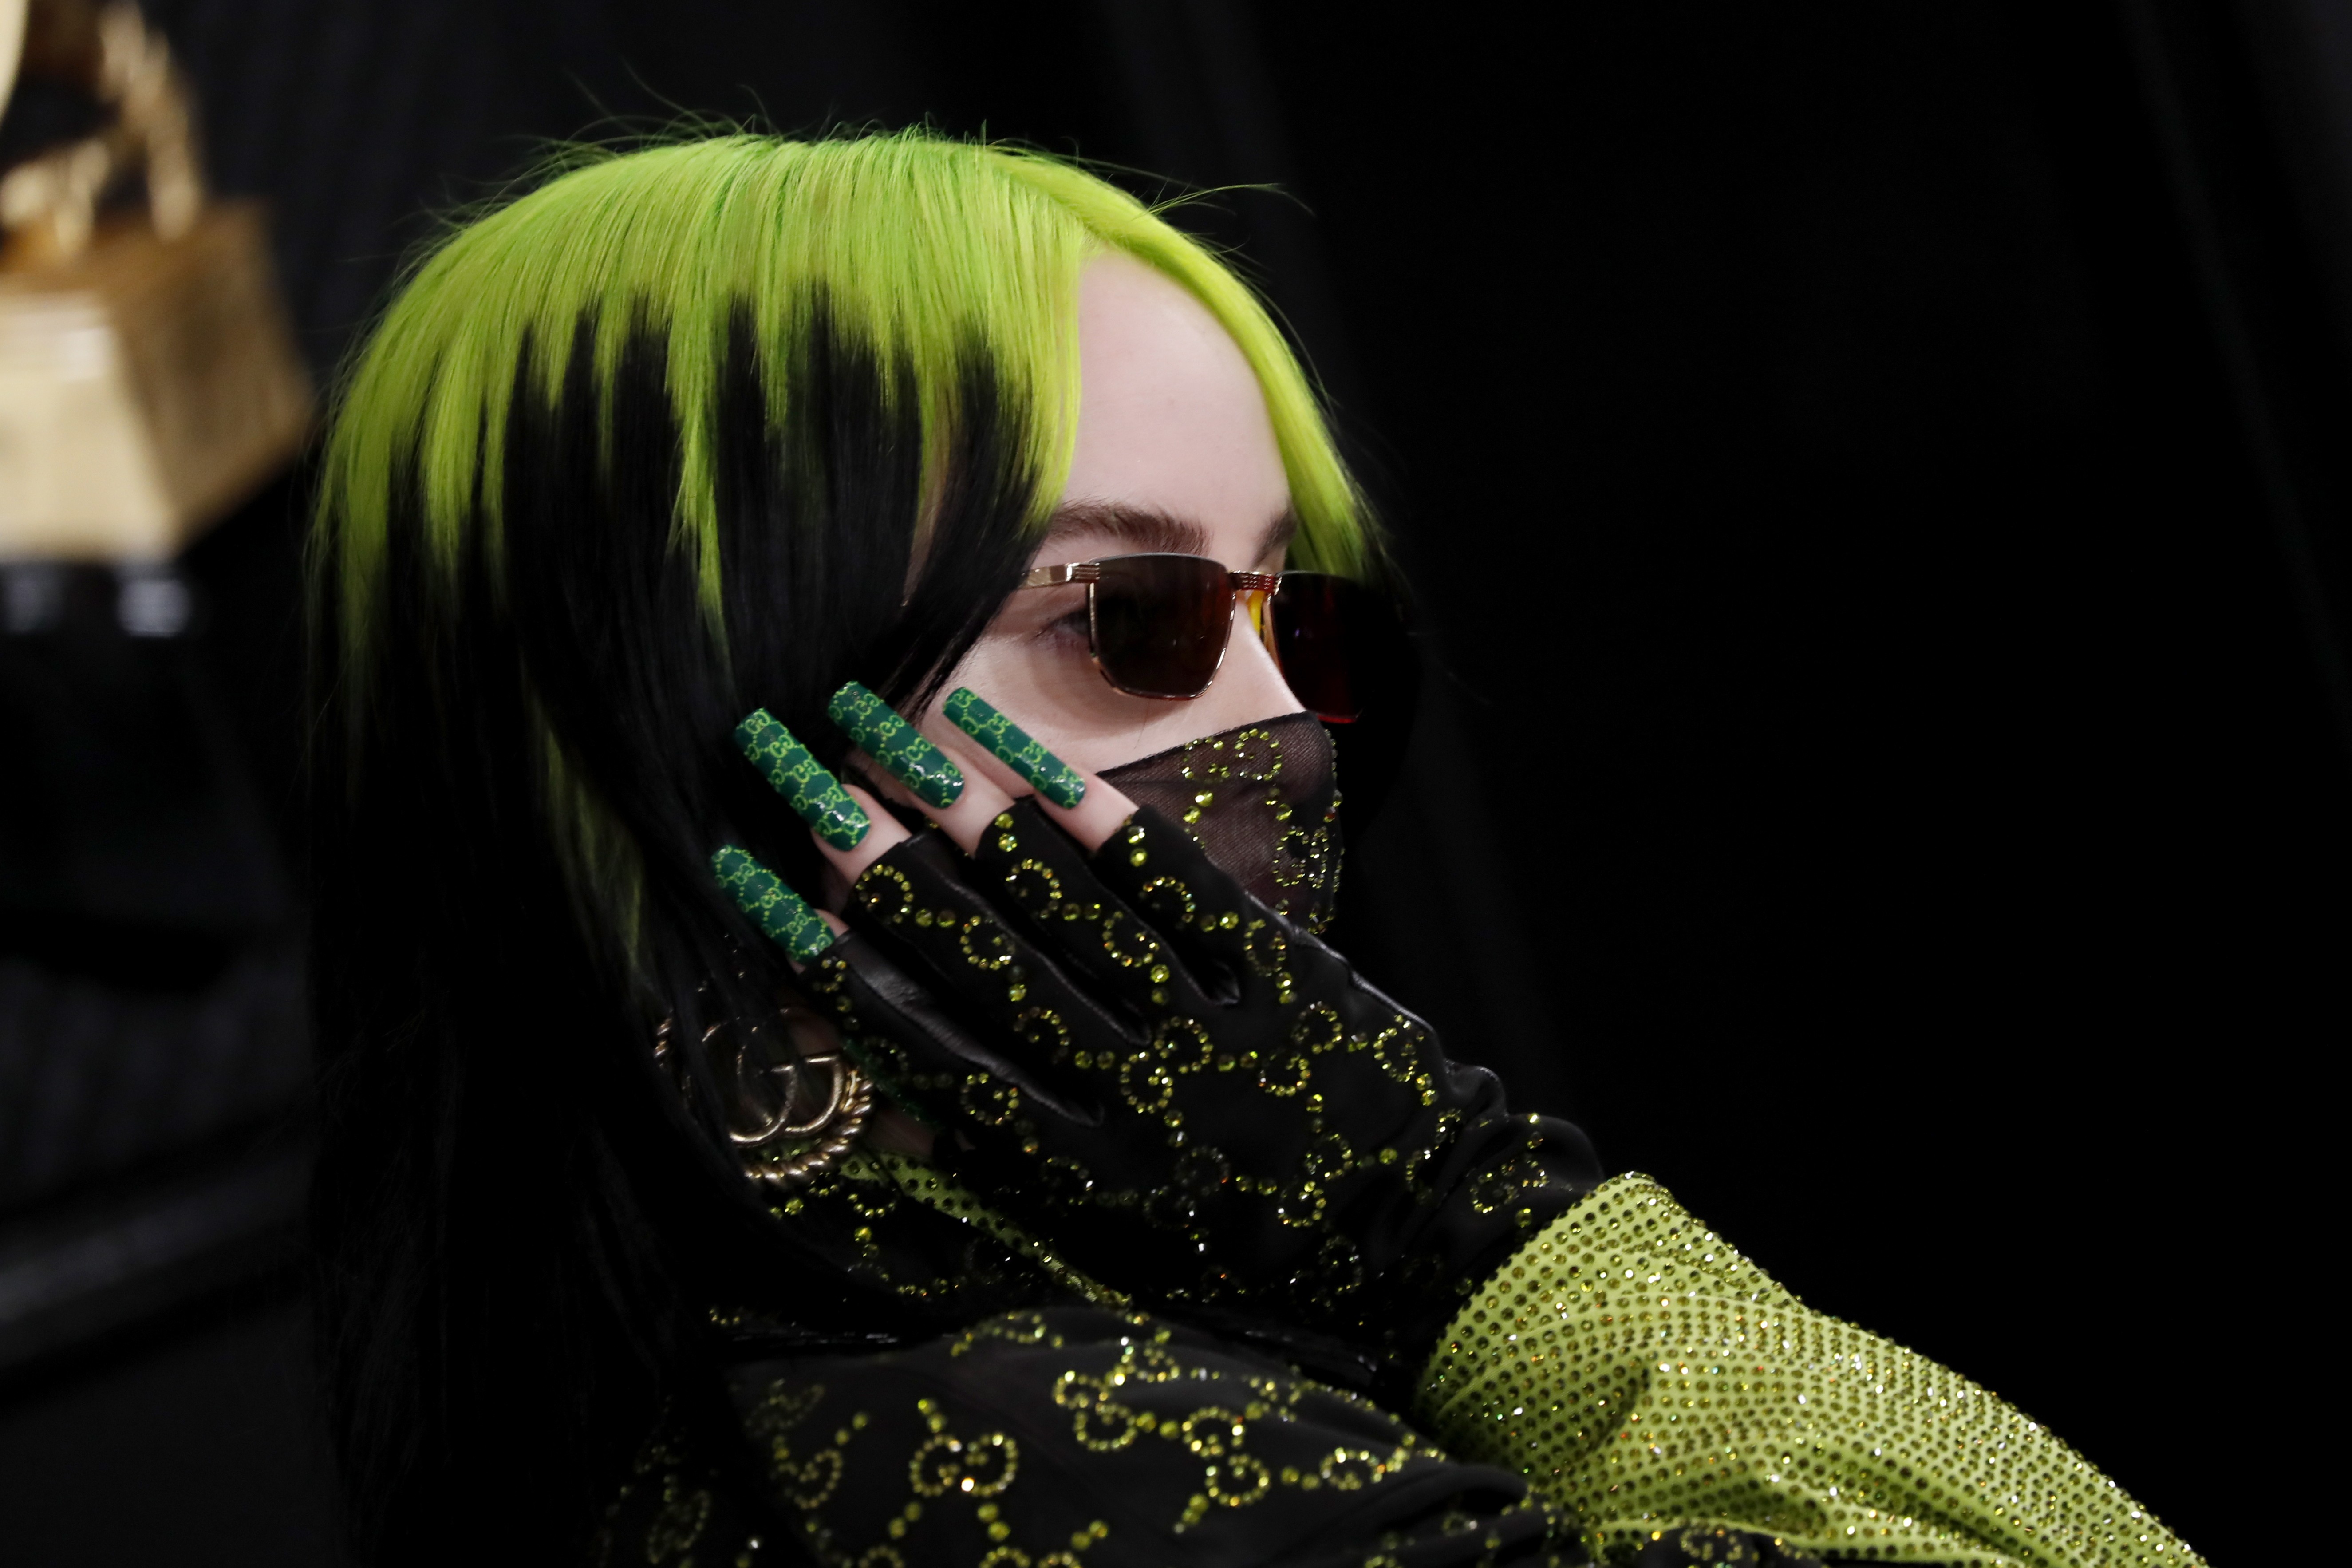 Going Viral Billie Eilish Is All Gucci At The Grammy Awards From Nails To Face The Singer Wears A Mask South China Morning Post